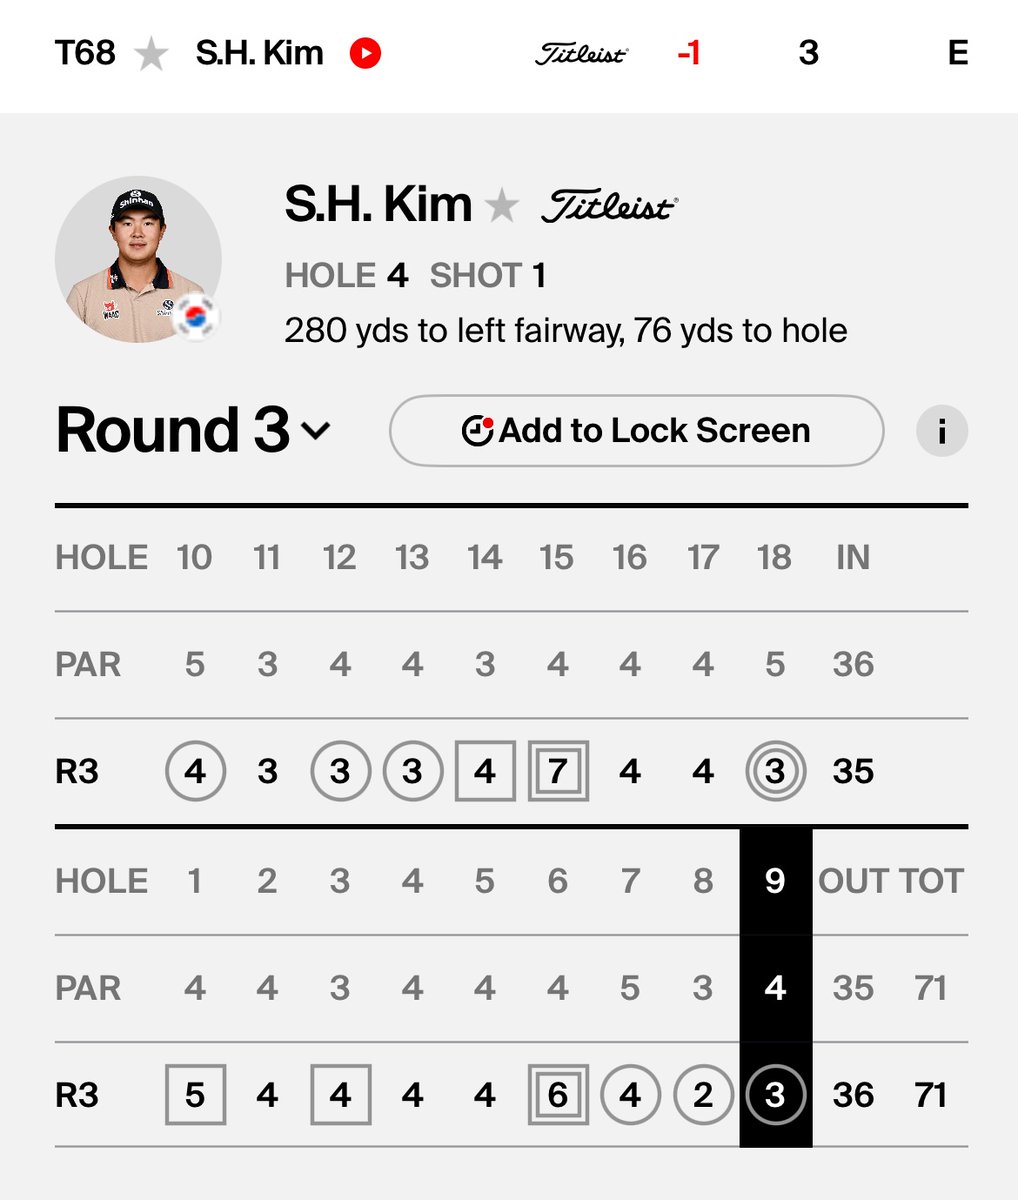 The best psycho scorecard I’ve seen this week at the PGA … SH Kim from Saturday.